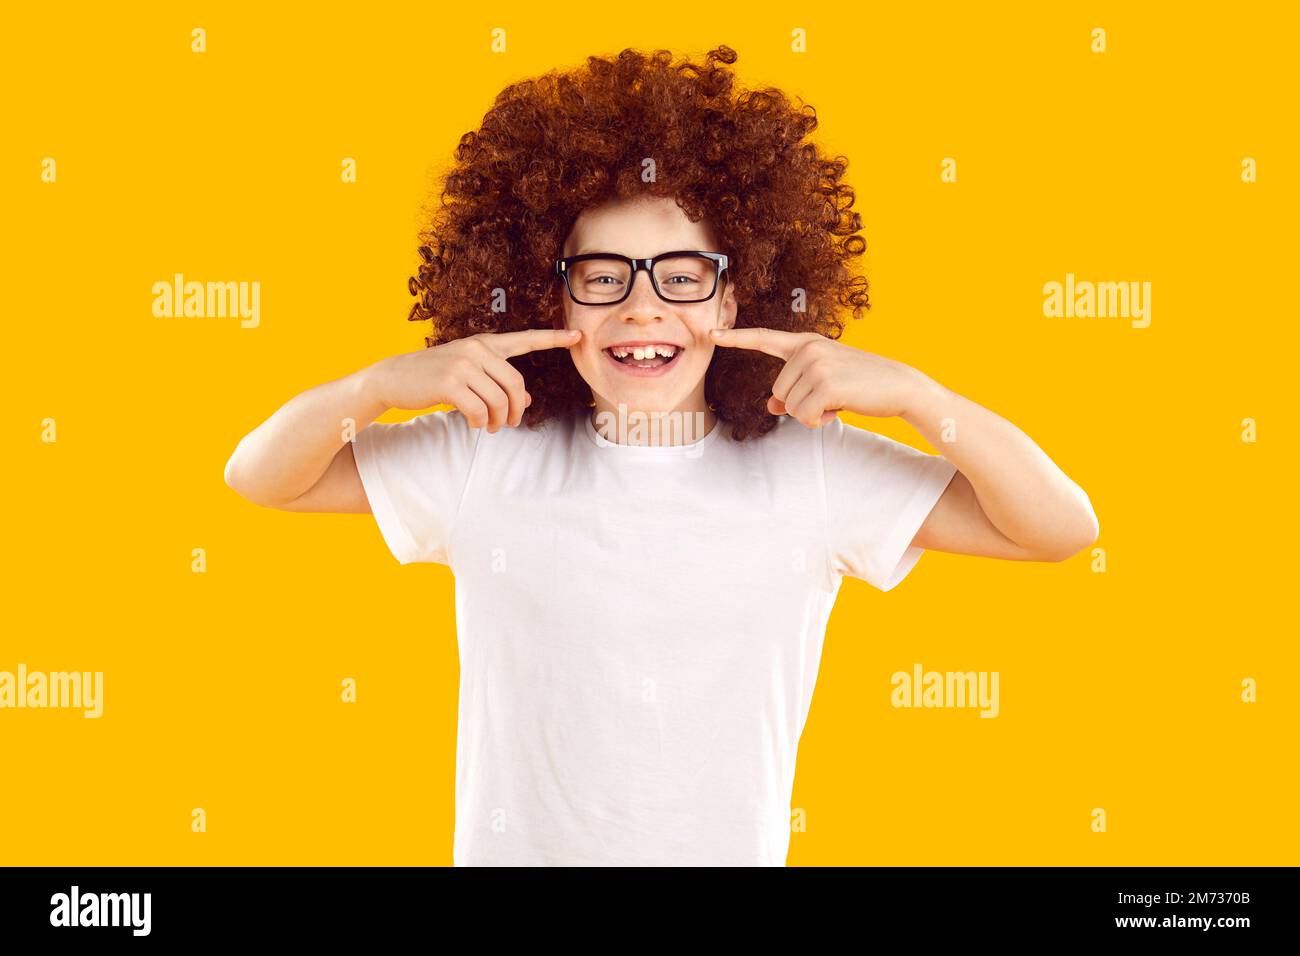 Funny happy joyful child in a curly wig showing his cheerful half toothless smile Stock Photo